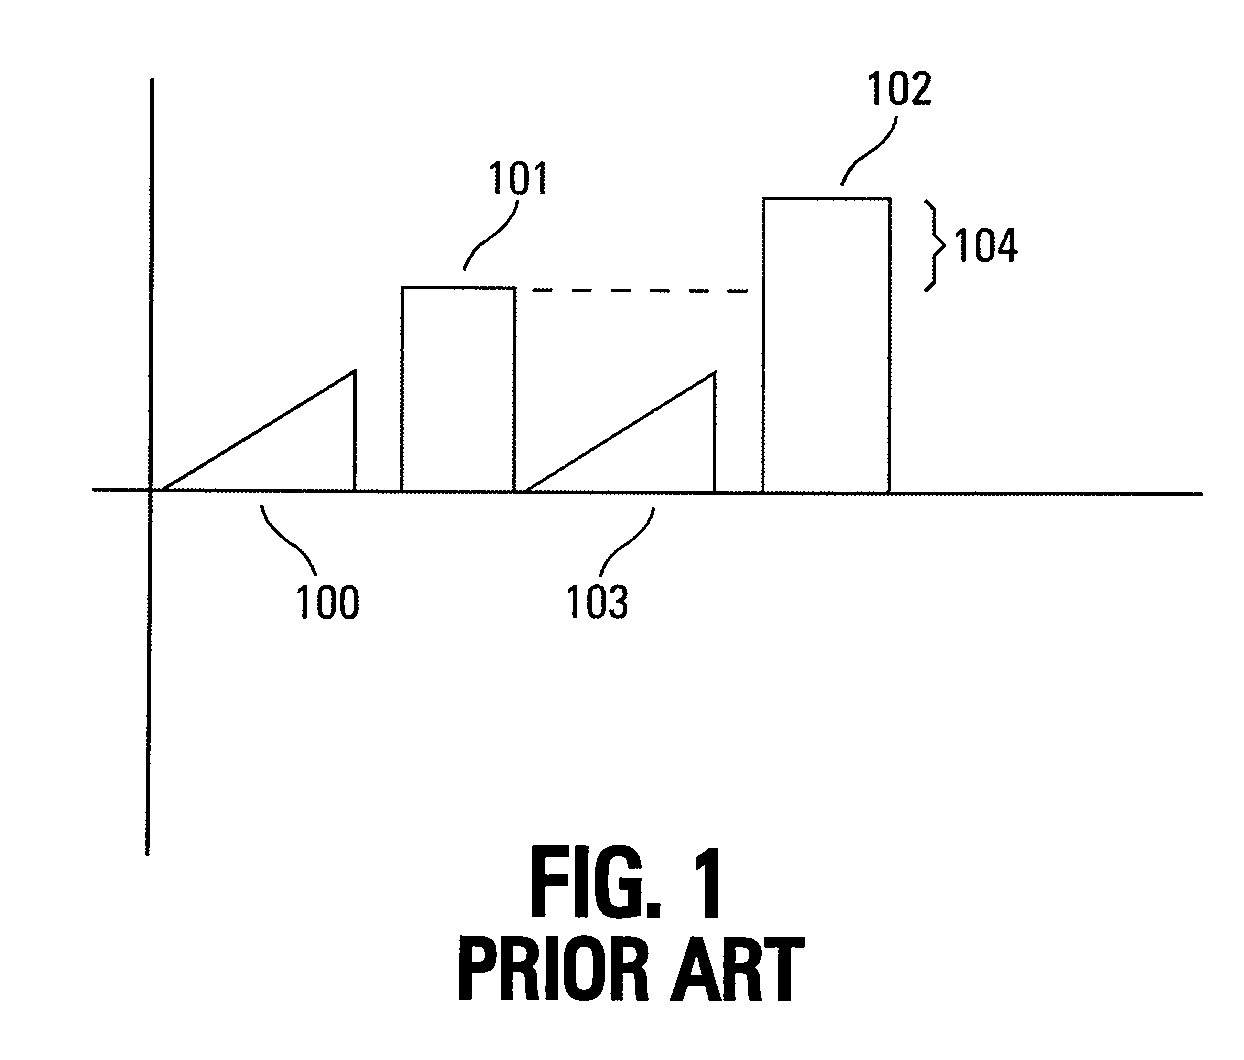 Mitigation of runaway programming of a memory device